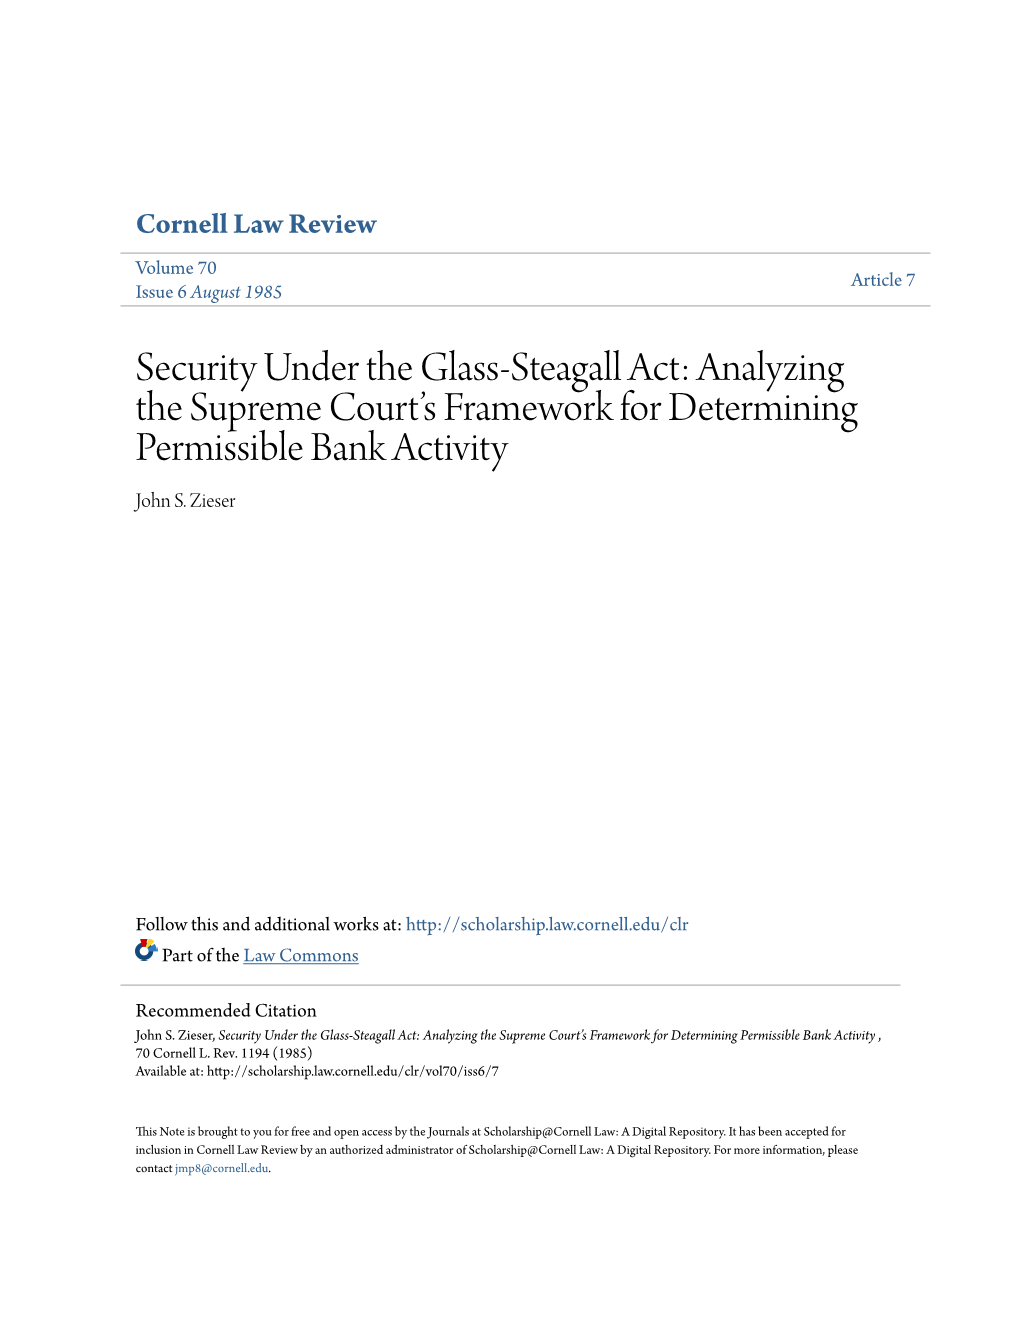 Security Under the Glass-Steagall Act: Analyzing the Supreme Court’S Framework for Determining Permissible Bank Activity John S